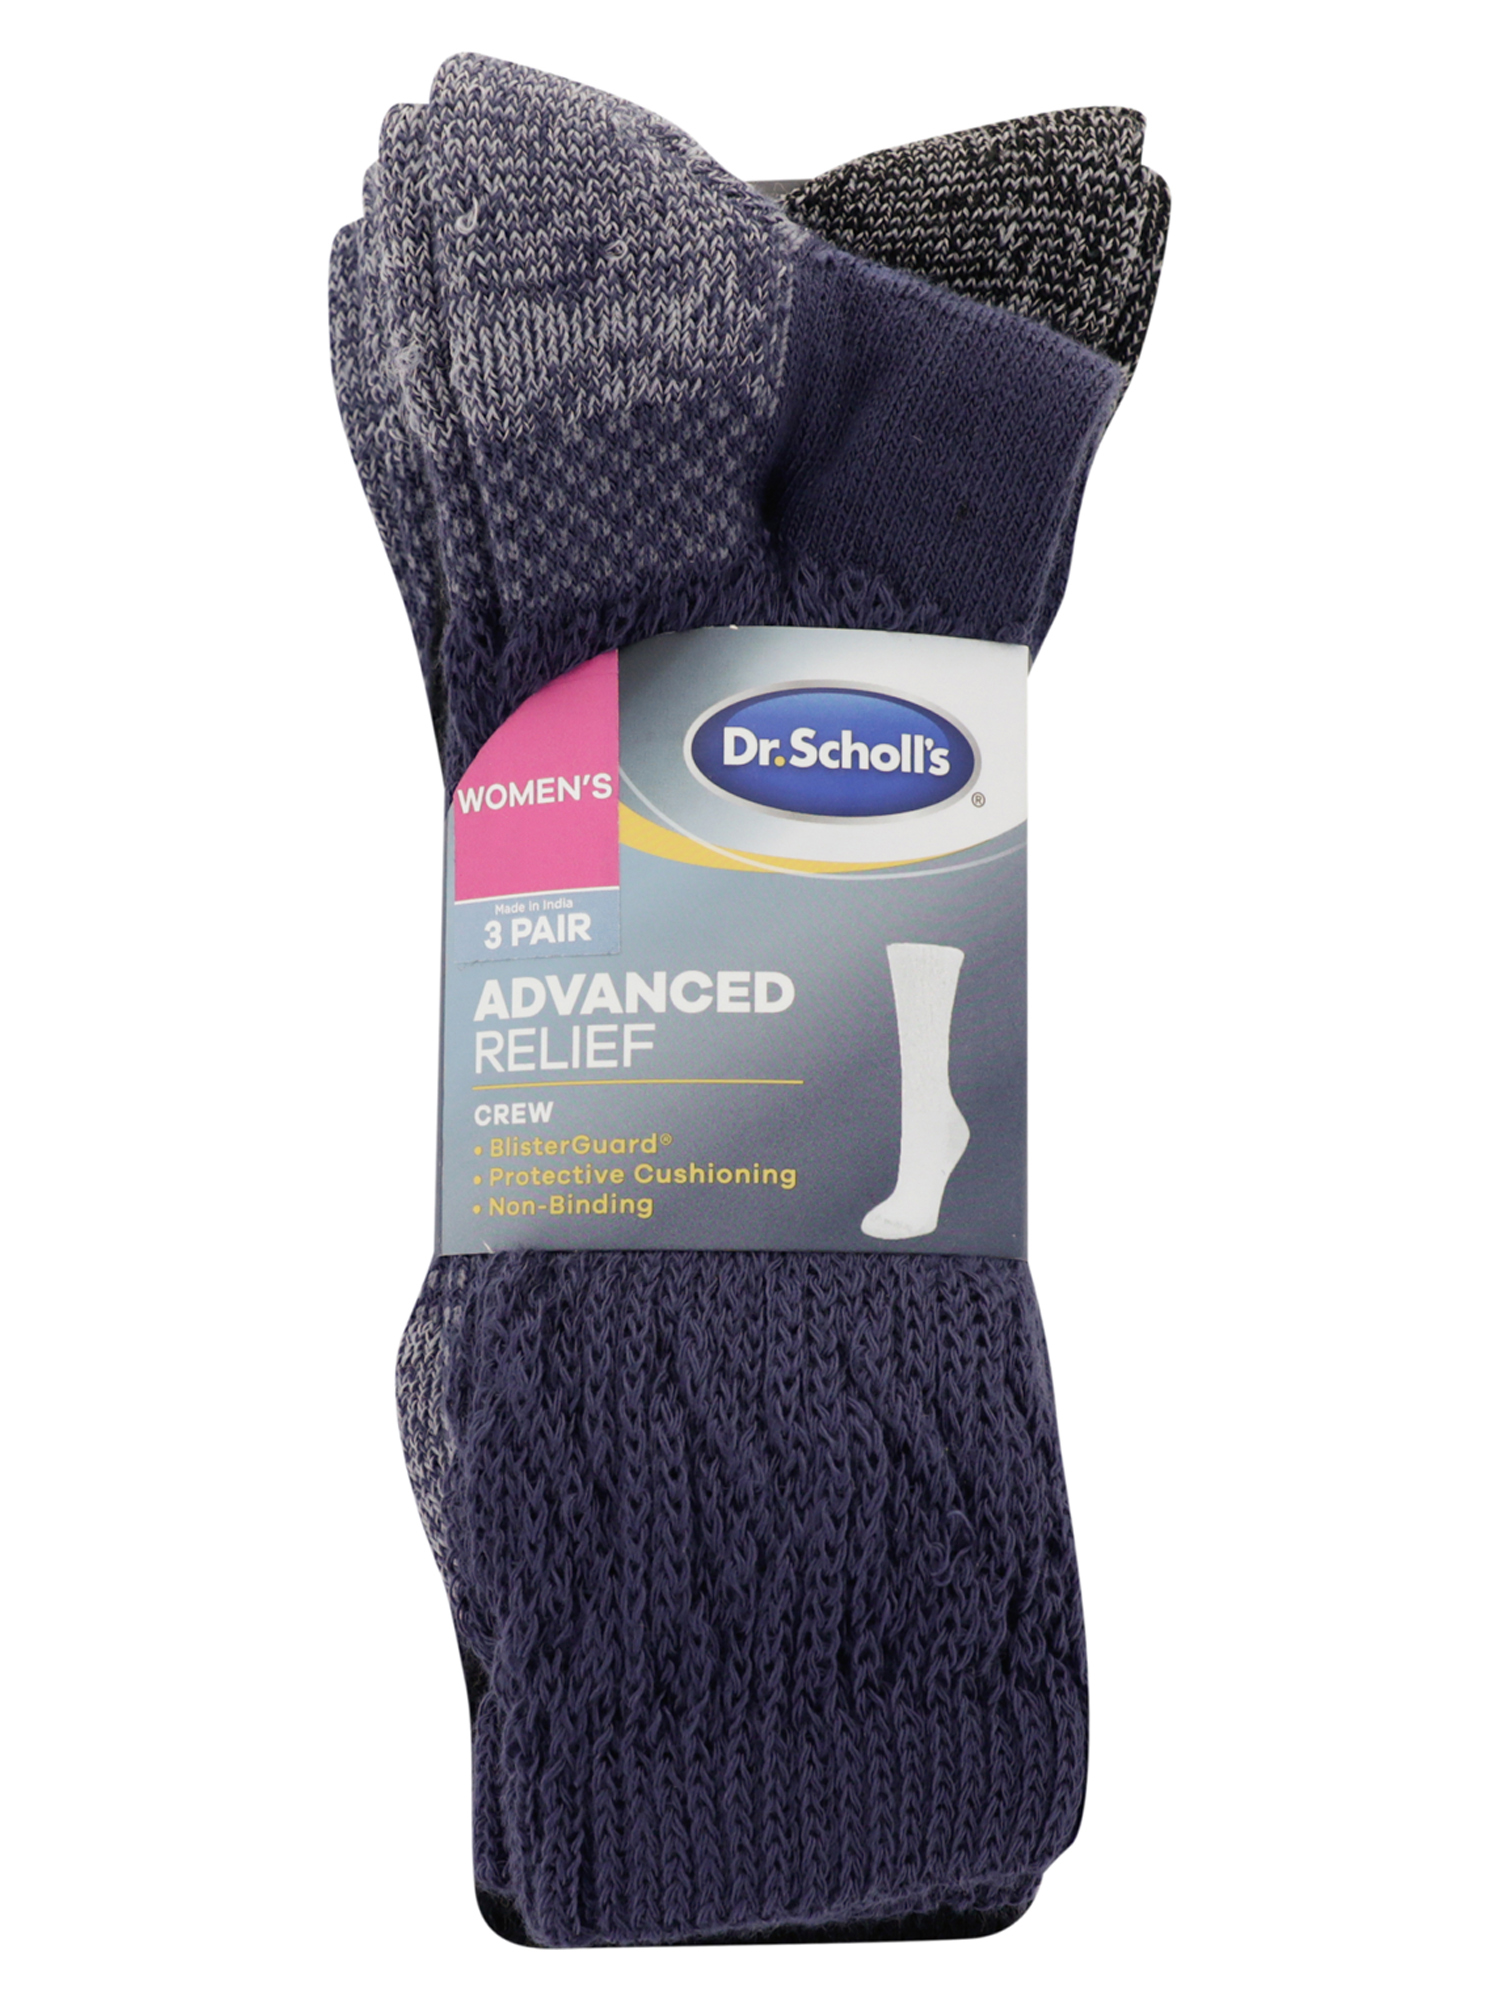 Dr. Scholl's Women's Advanced Relief Blister Guard Crew Socks, 3 Pack ...